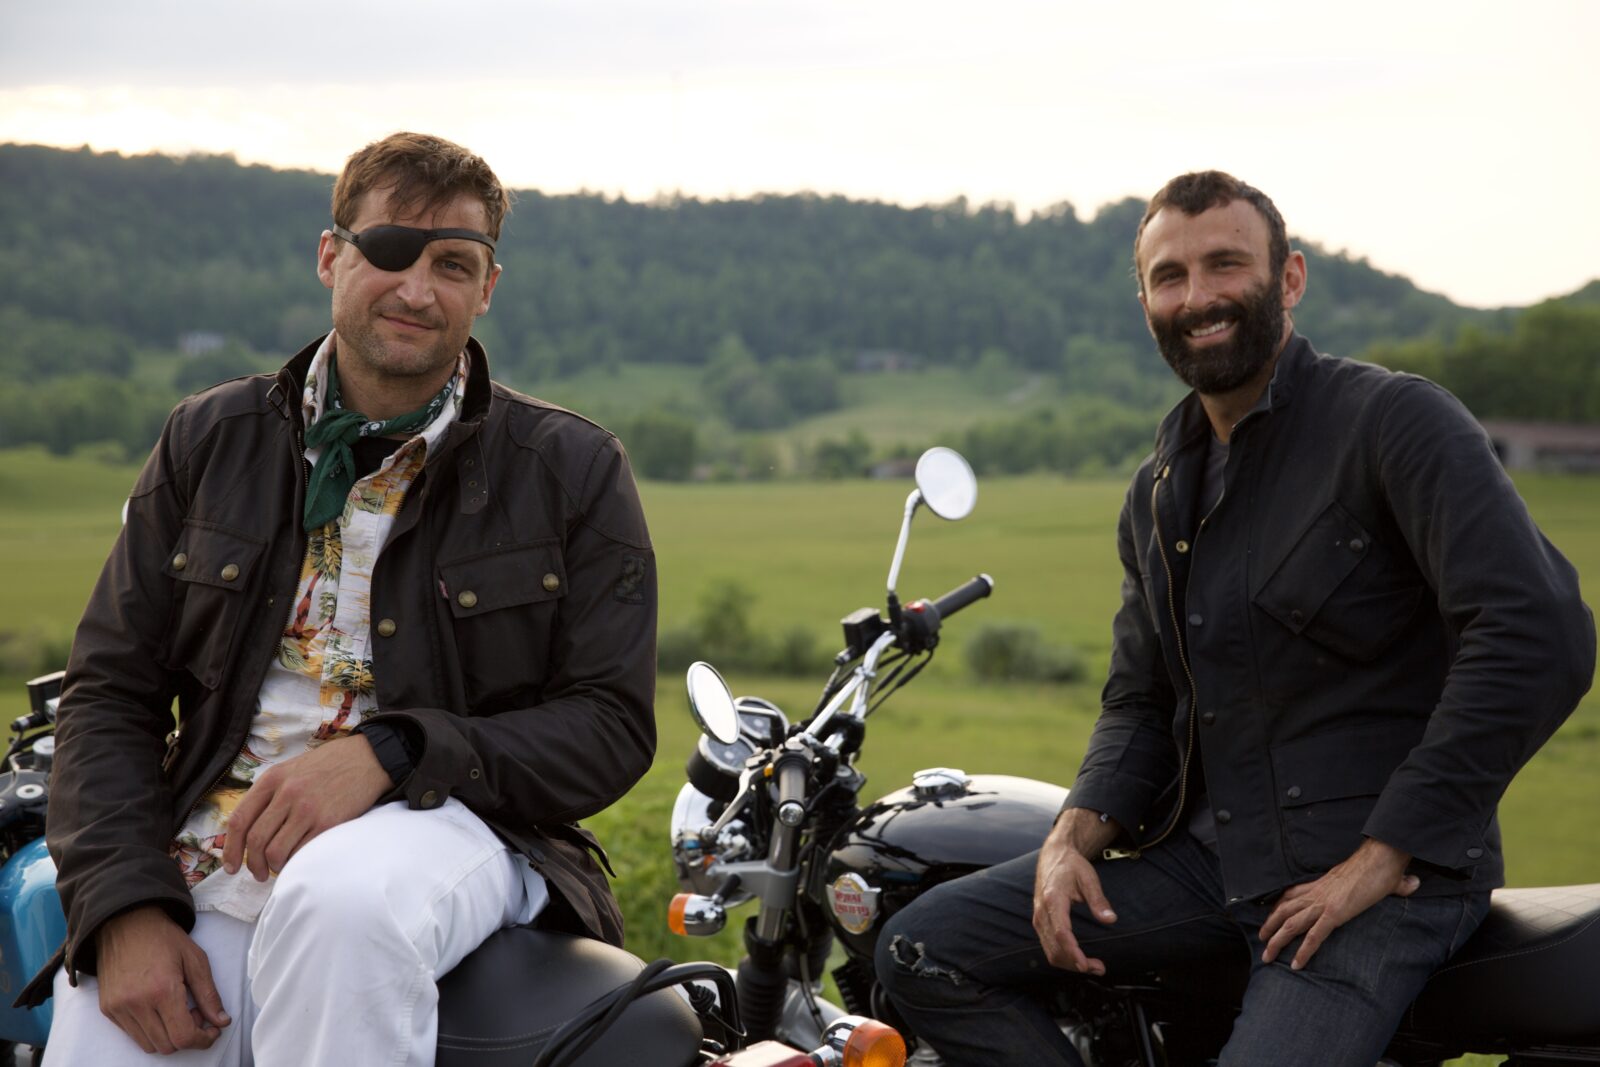 Journalists Carmen Gentile and Jason Motlagh at New River Gorge National Park in Fayetteville, W.Va., on Sunday, May 23, 2021. They're riding Royal Enfield motorcycles through the Rust Belt & Appalachia. Motlagh is on assignment for Rolling Stone. (Photograph by Matt Cipollone)